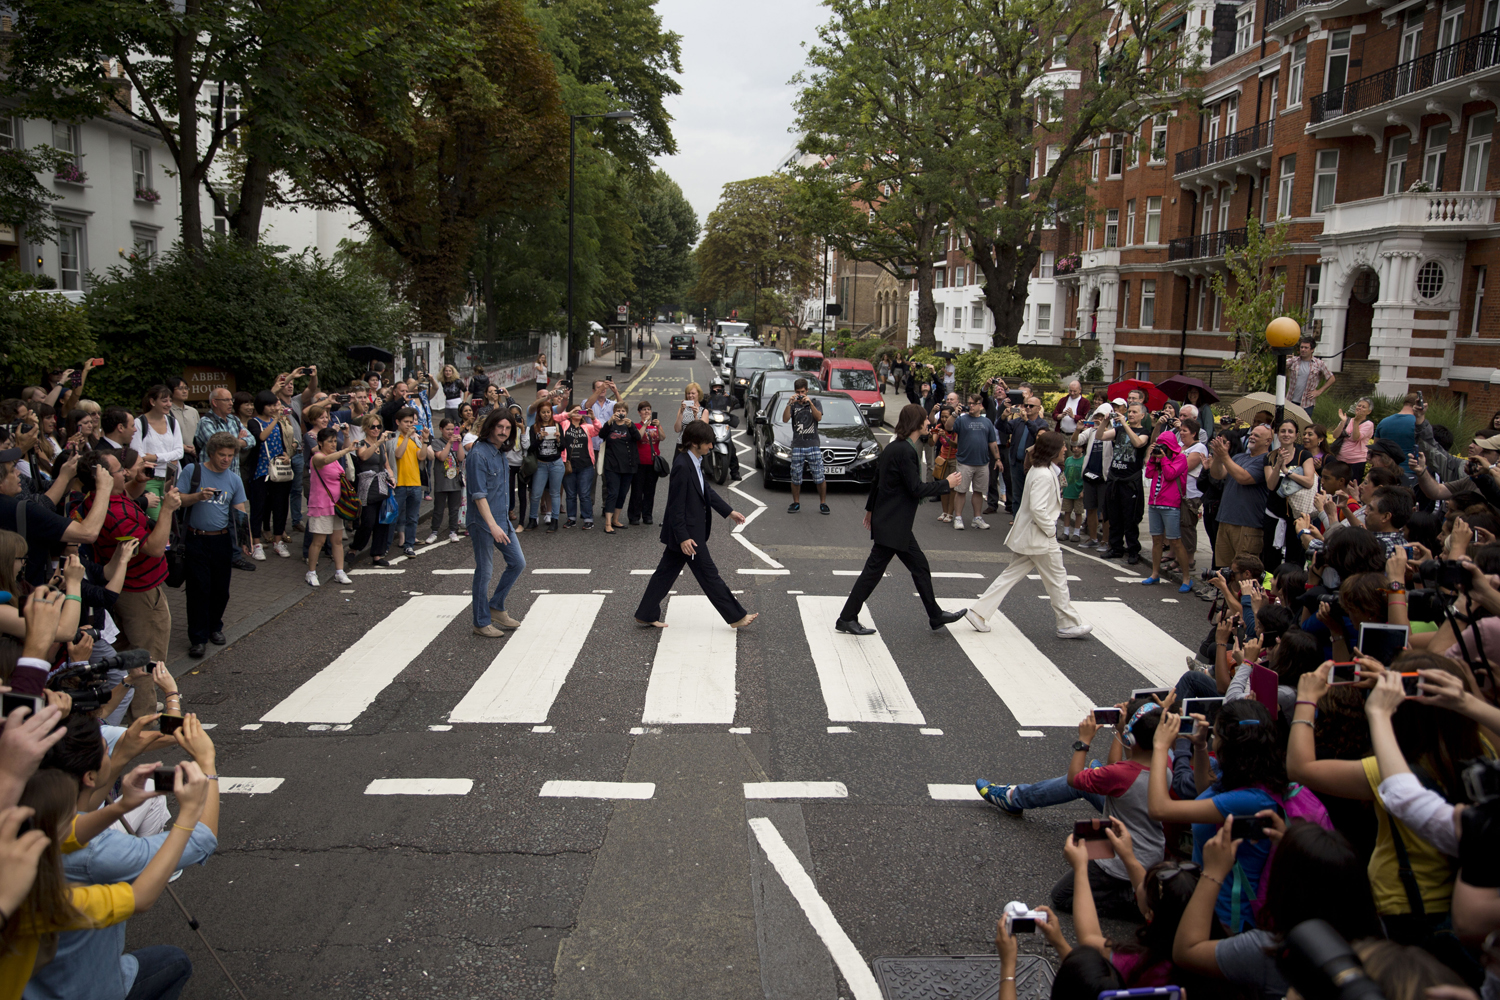 Aug. 8, 2014. The cast of the West End Beatles musical show  Let it Be  pose for photographers by attempting to recreate the cover photograph of the Beatles album  Abbey Road  on the zebra crossing on Abbey Road in London.